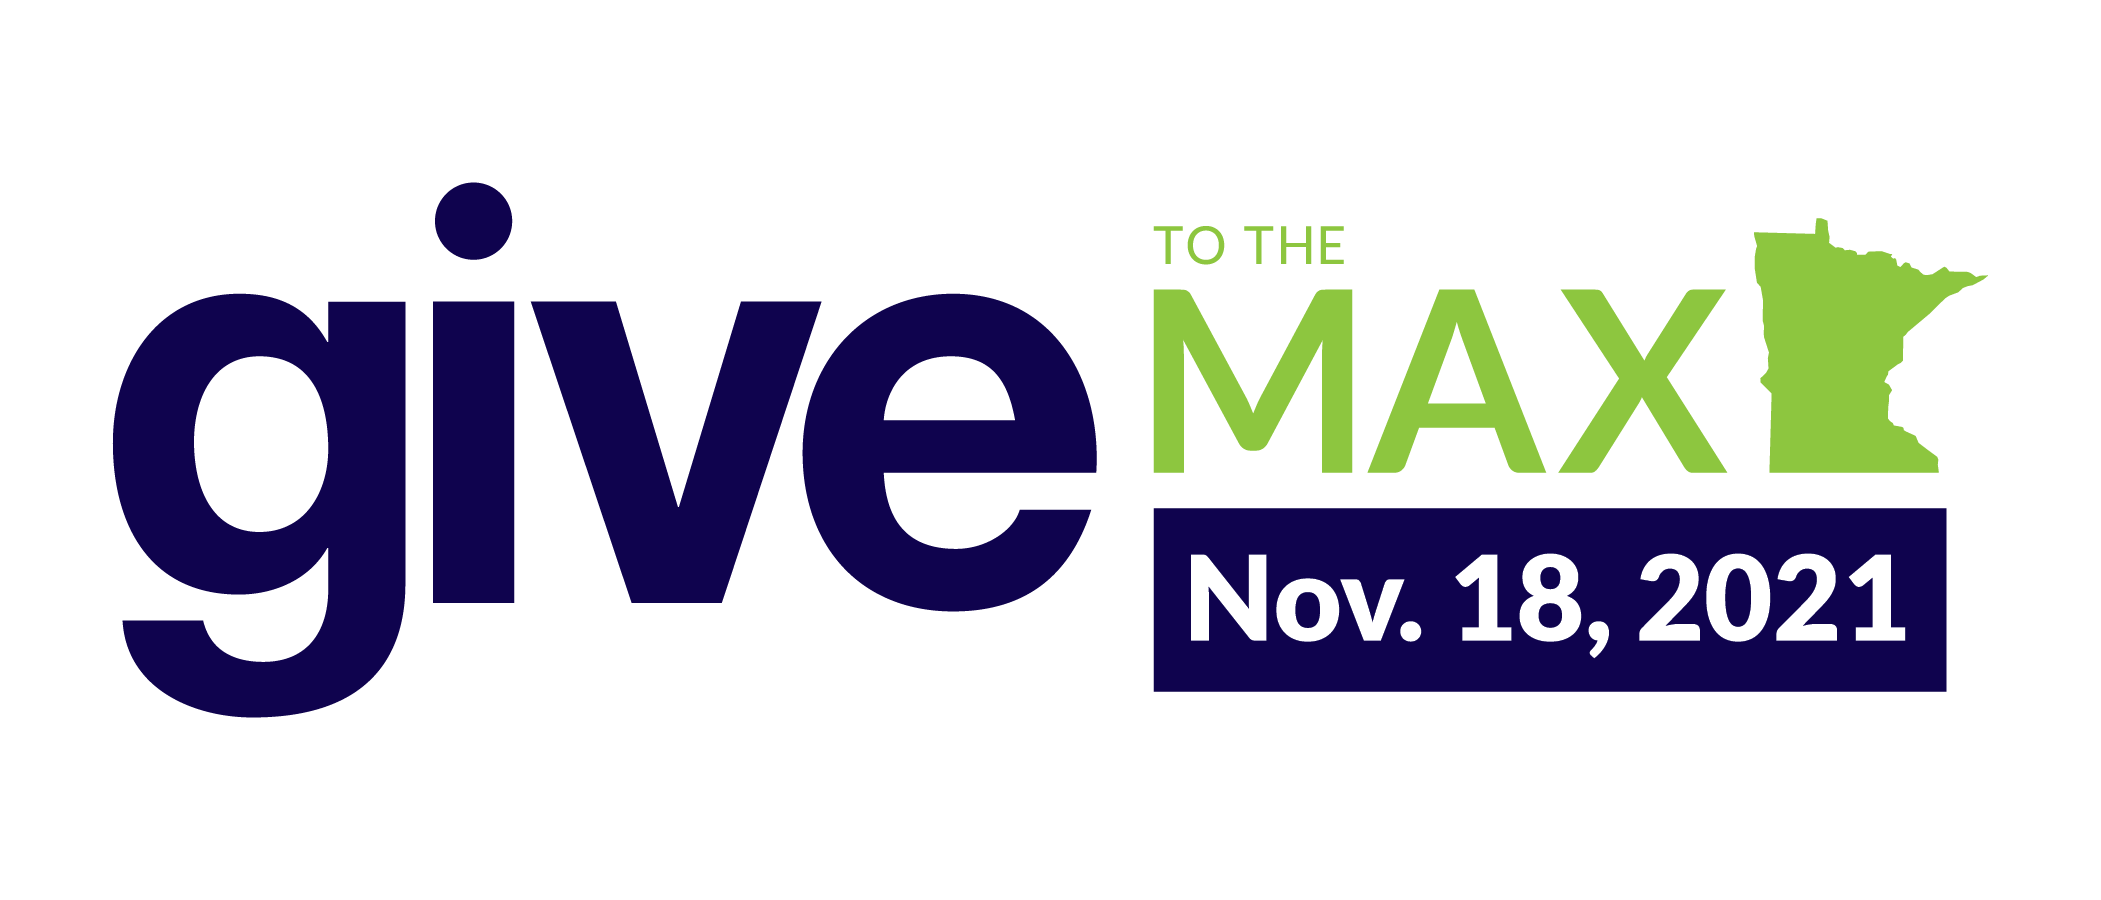 Give to the Max Nov. 18, 2021